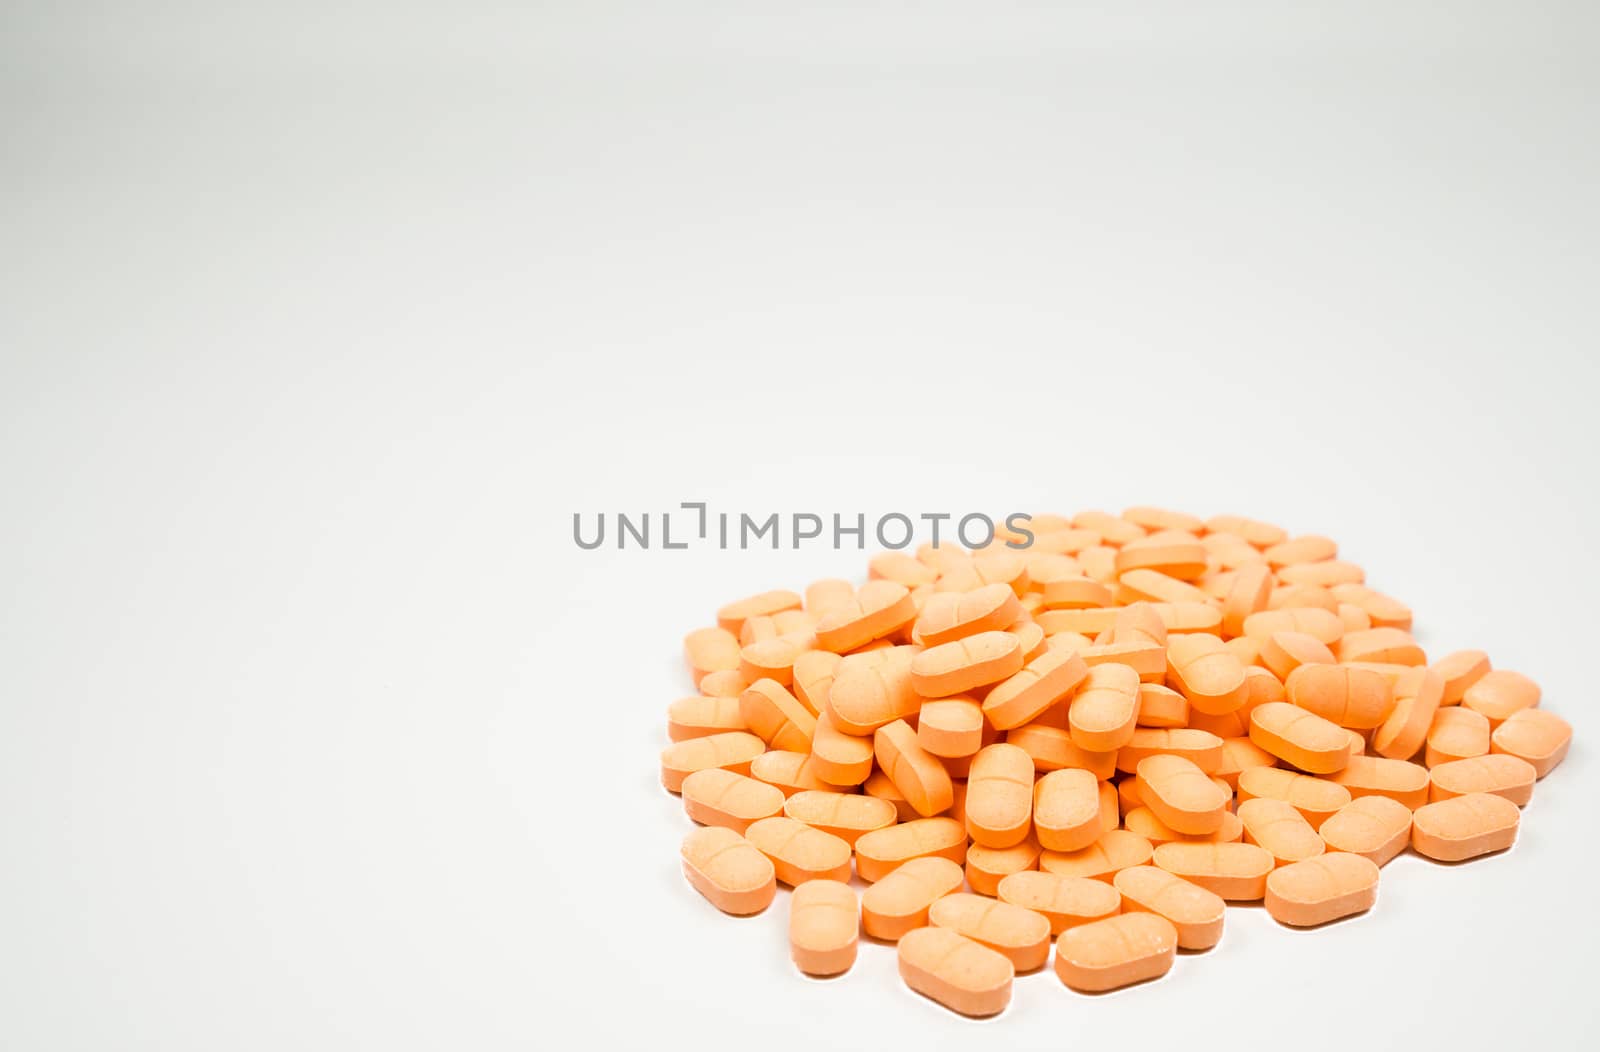 Pile of muscle relaxant, pain relief tablet pills isolated on white background with copy space for text. Pharmaceutical industry. Pharmacy background. Global healthcare concept.